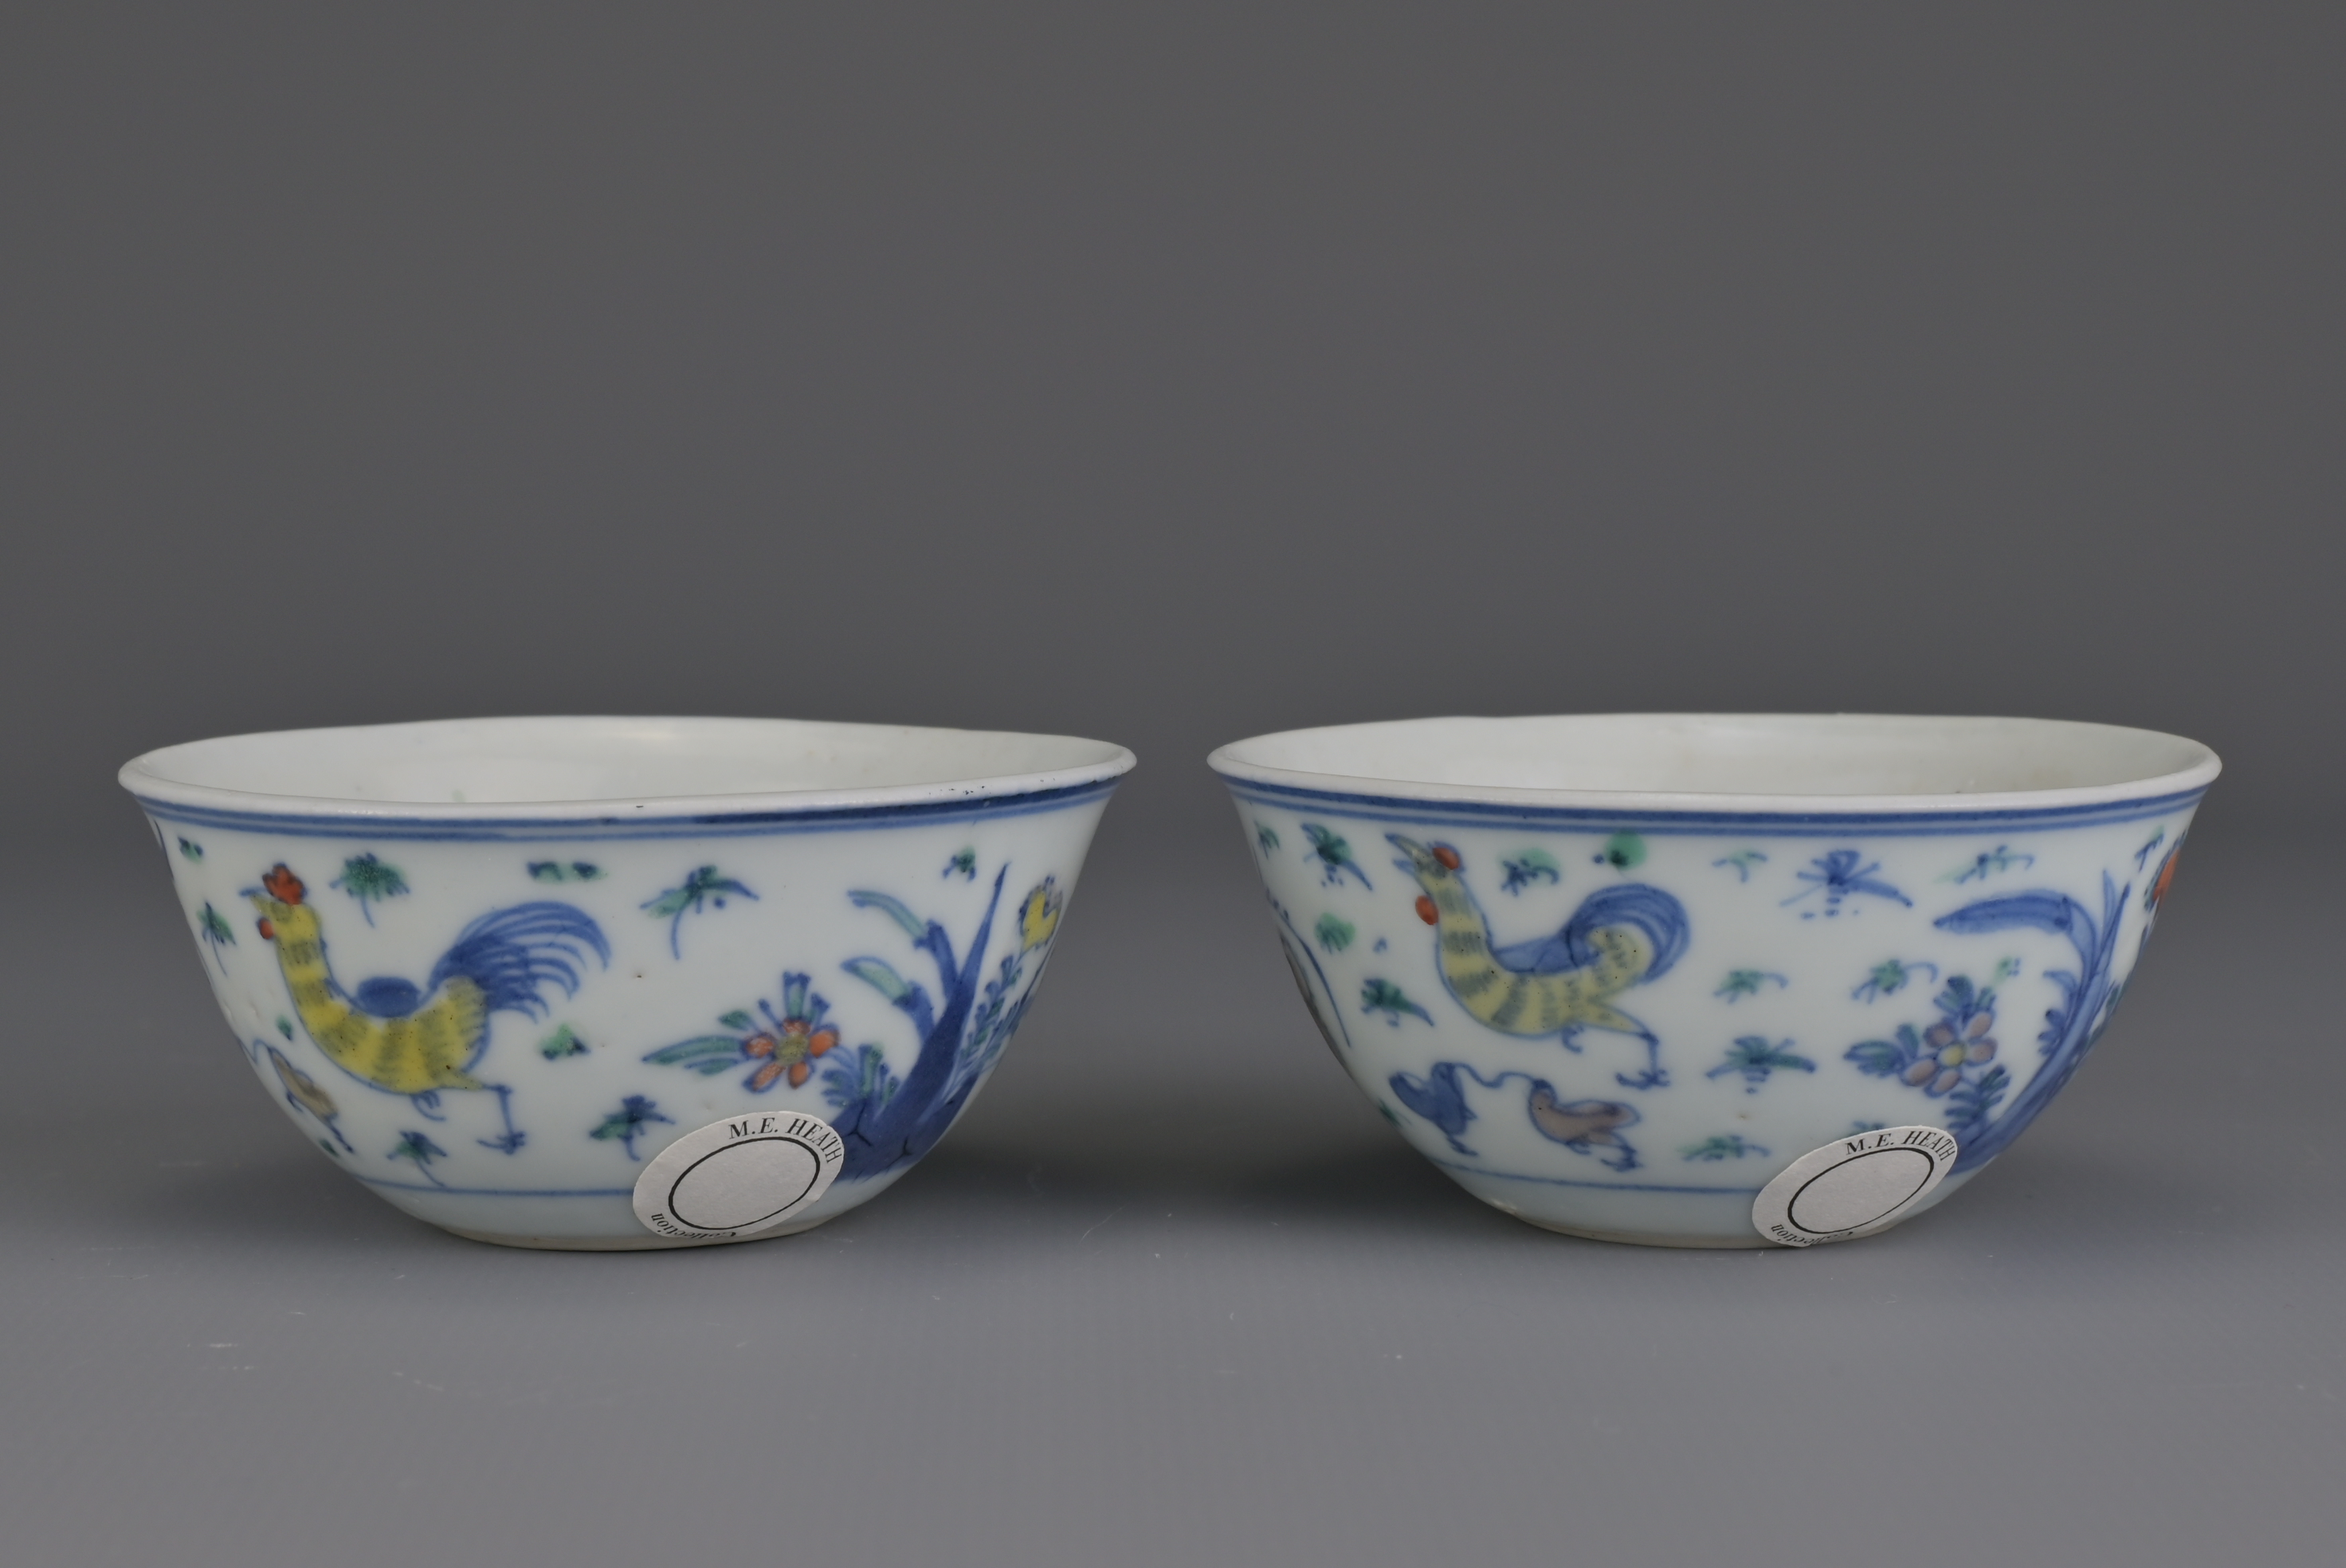 PAIR OF CHINESE DOUCAI PORCELAIN ‘CHICKEN’ CUPS, KANGXI PERIOD, 18th CENTURY - Image 4 of 8